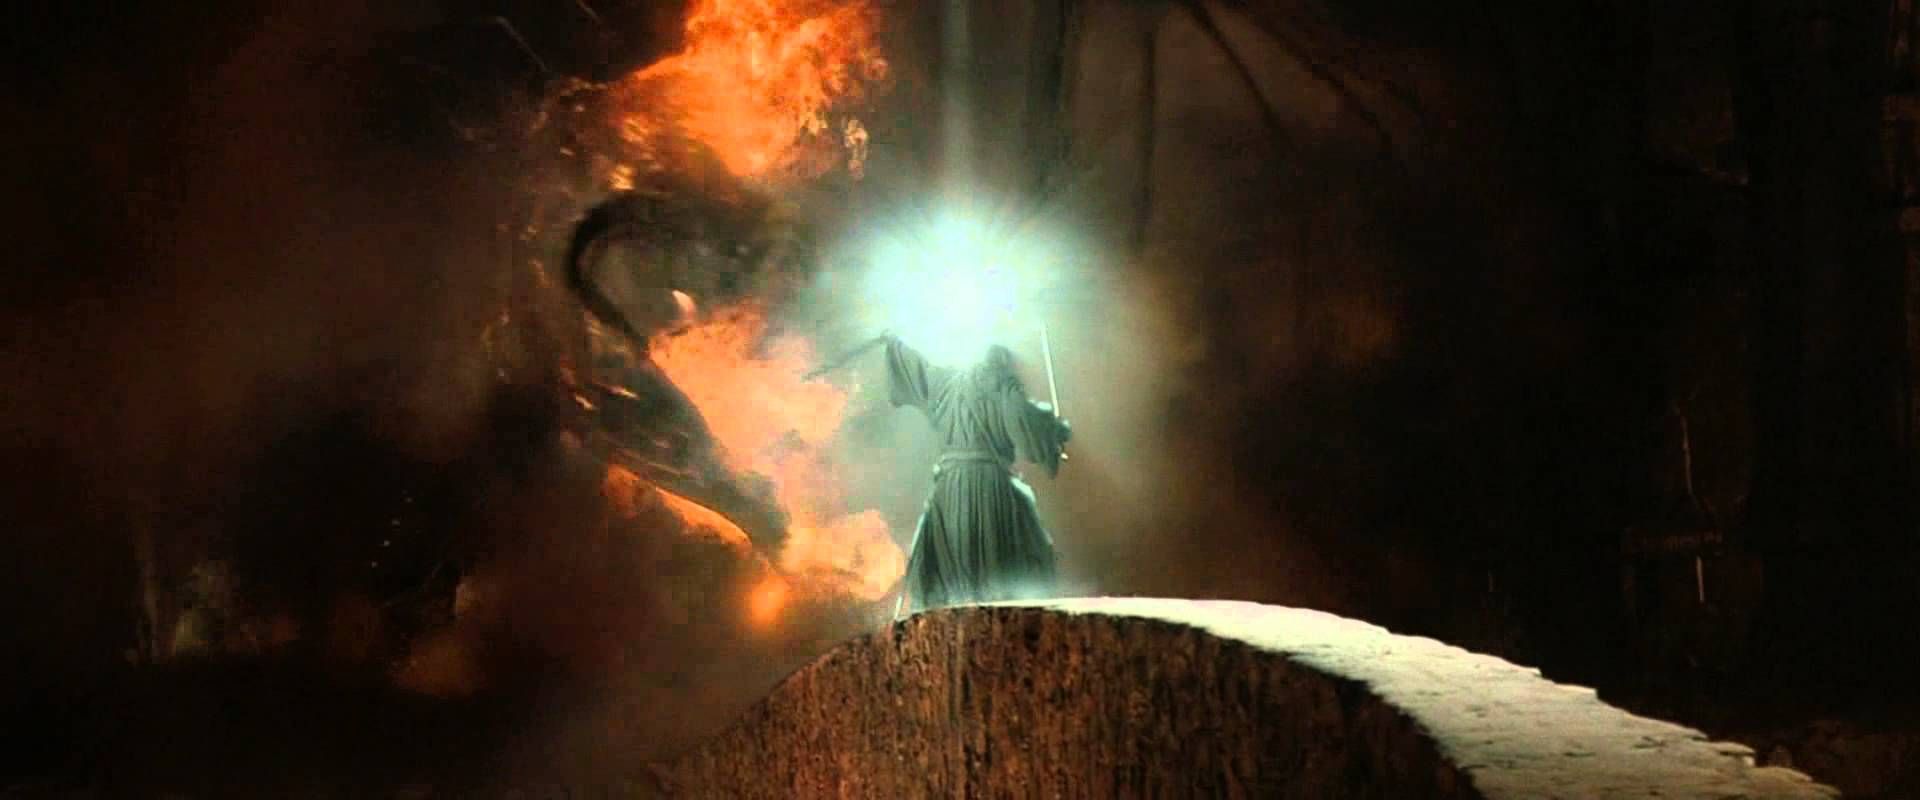 Gandalf Balrog Lord of the Rings Peter Jackson